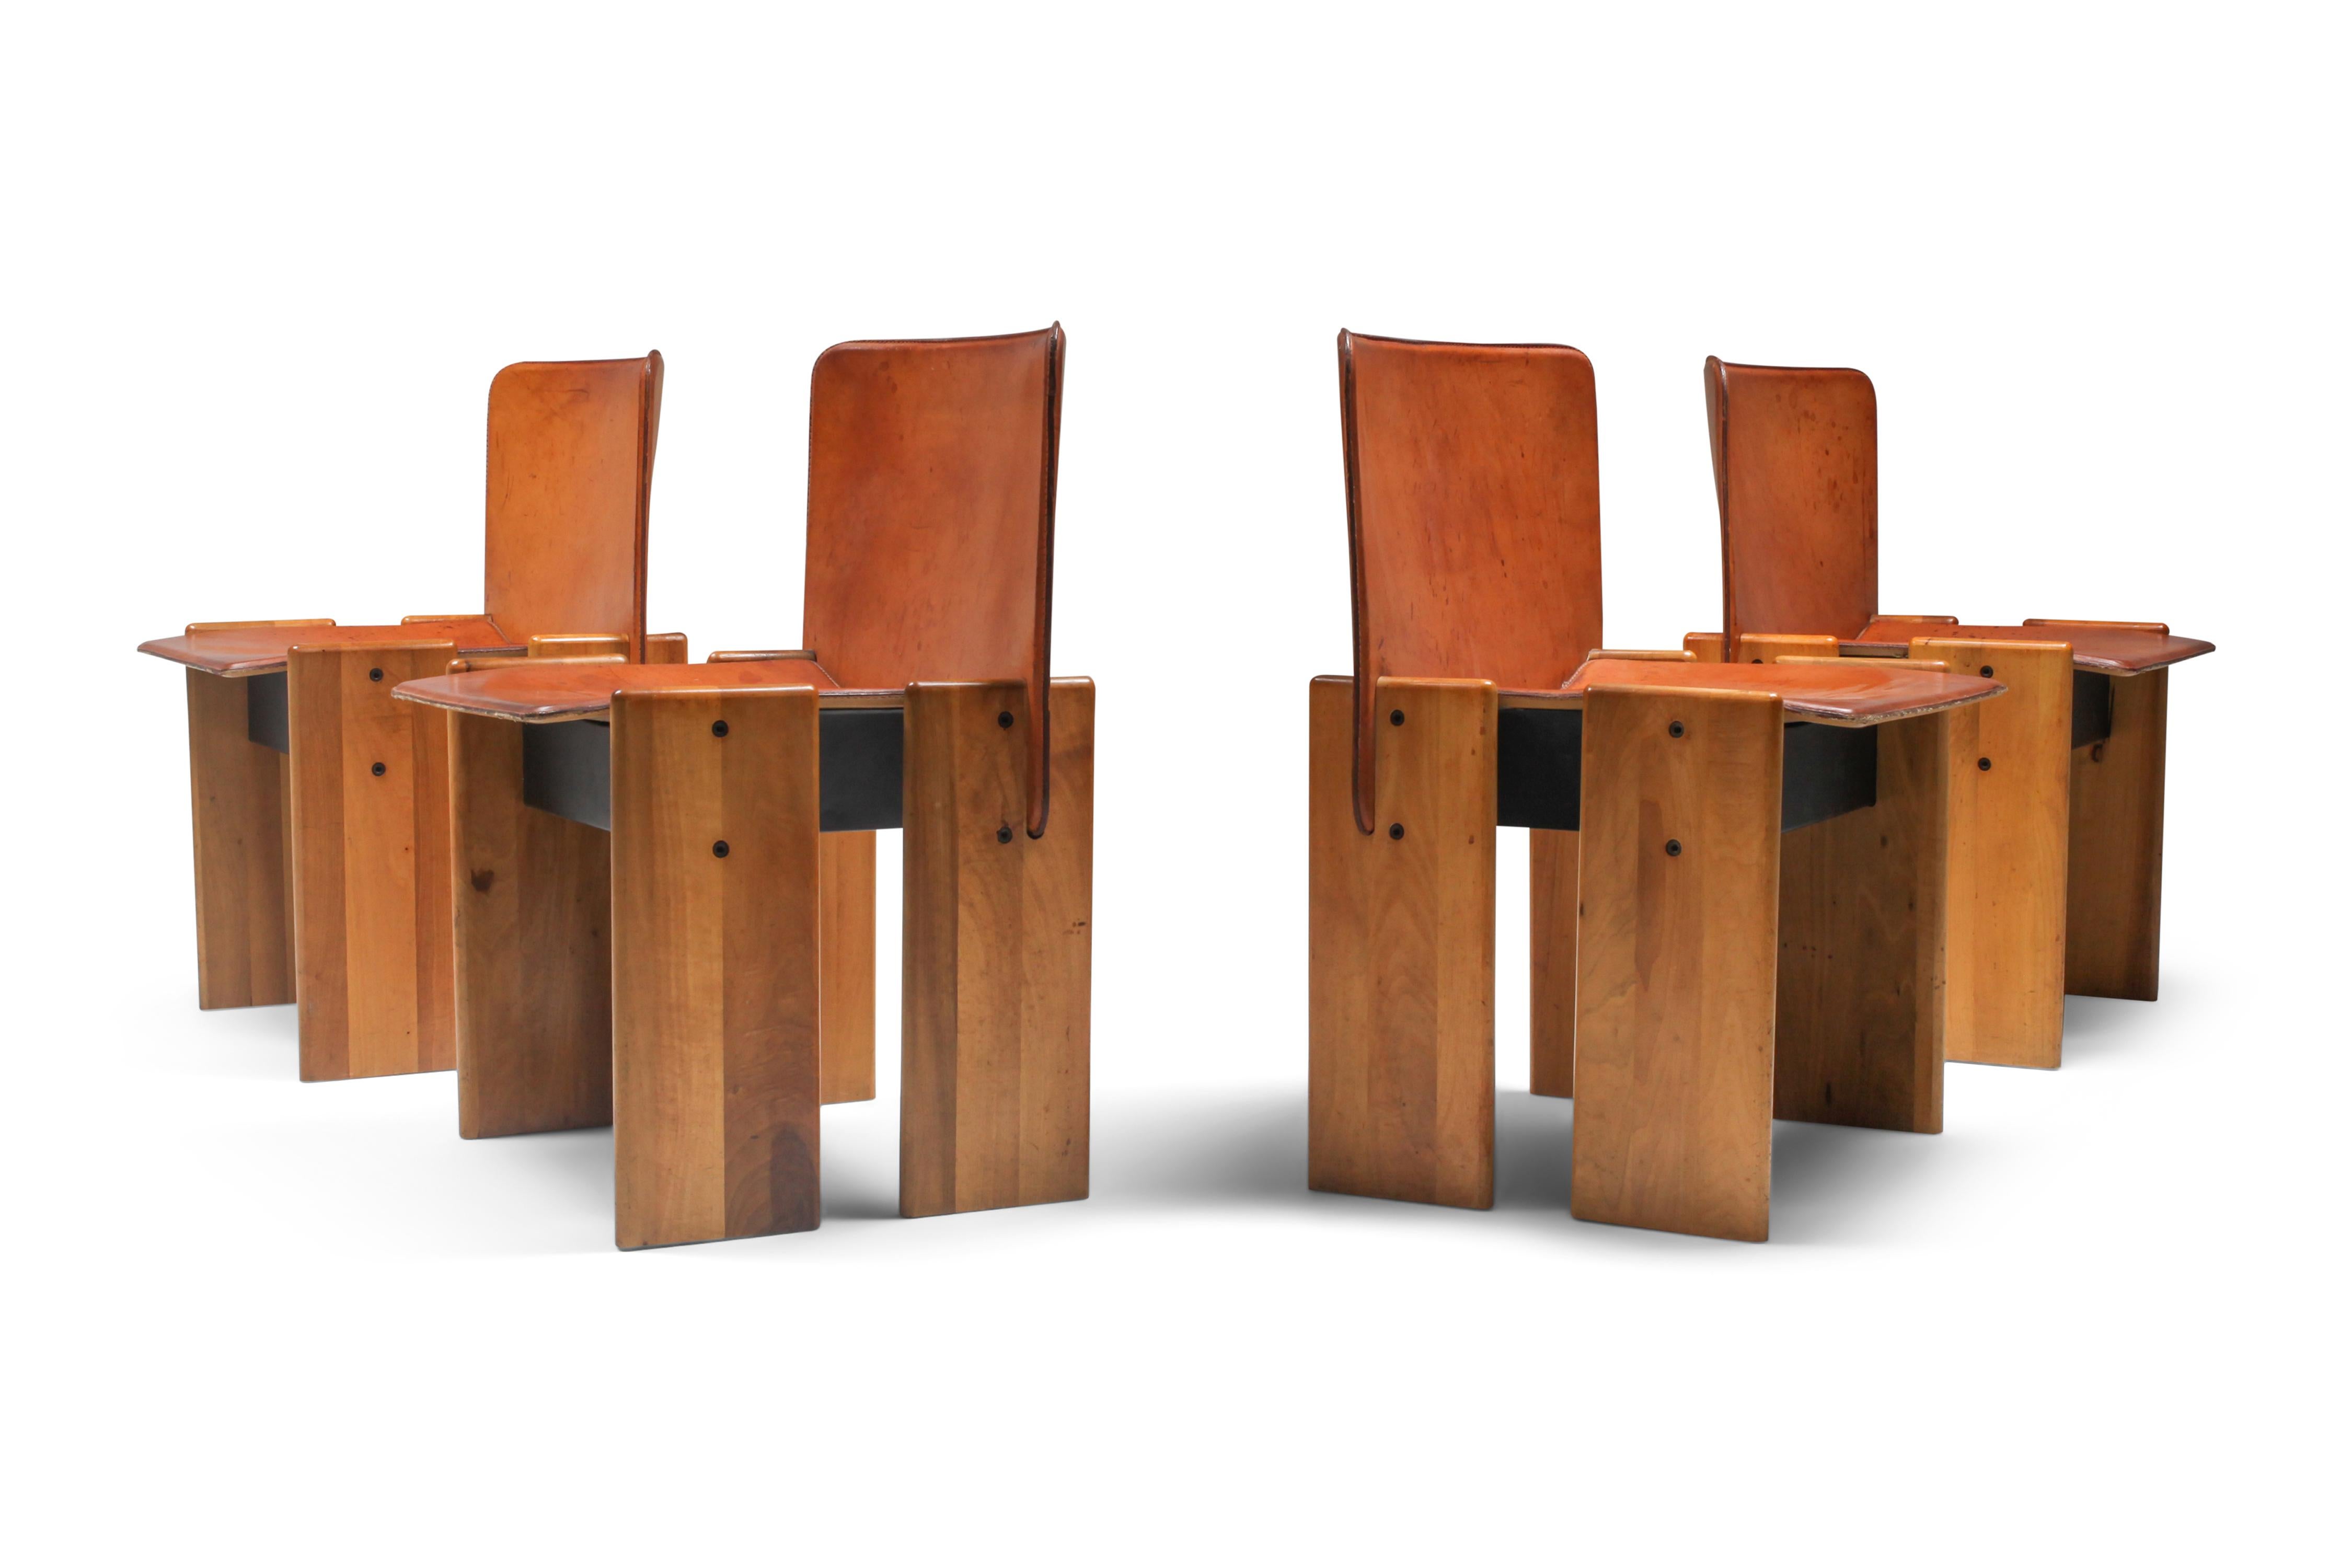 Walnut and cognac leather dining chairs by Afra & Tobia Scarpa, Italy, 1970s, wide model, set of four

The wonderfully cognac leather forms a striking combination with the walnut wooden frame. Interesting is the flat and straight shape of this